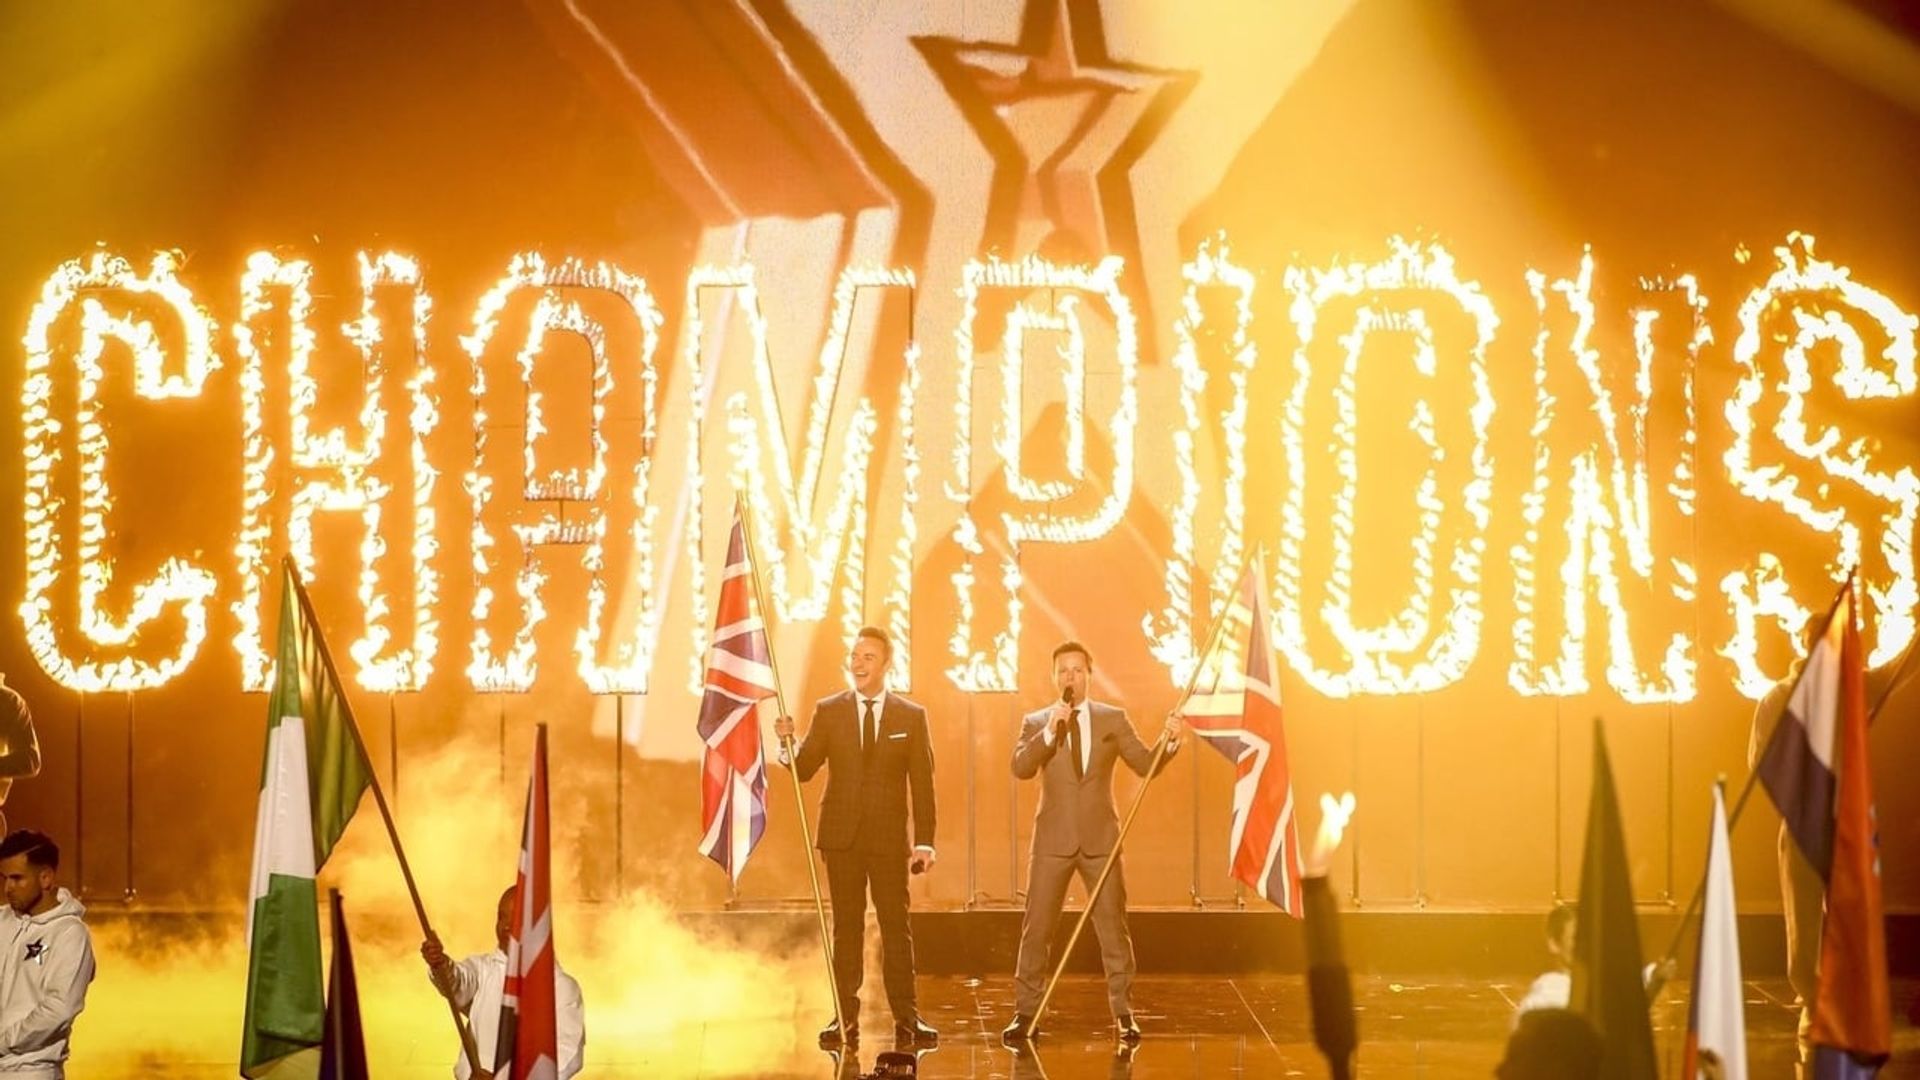 Britain's Got Talent: The Champions background